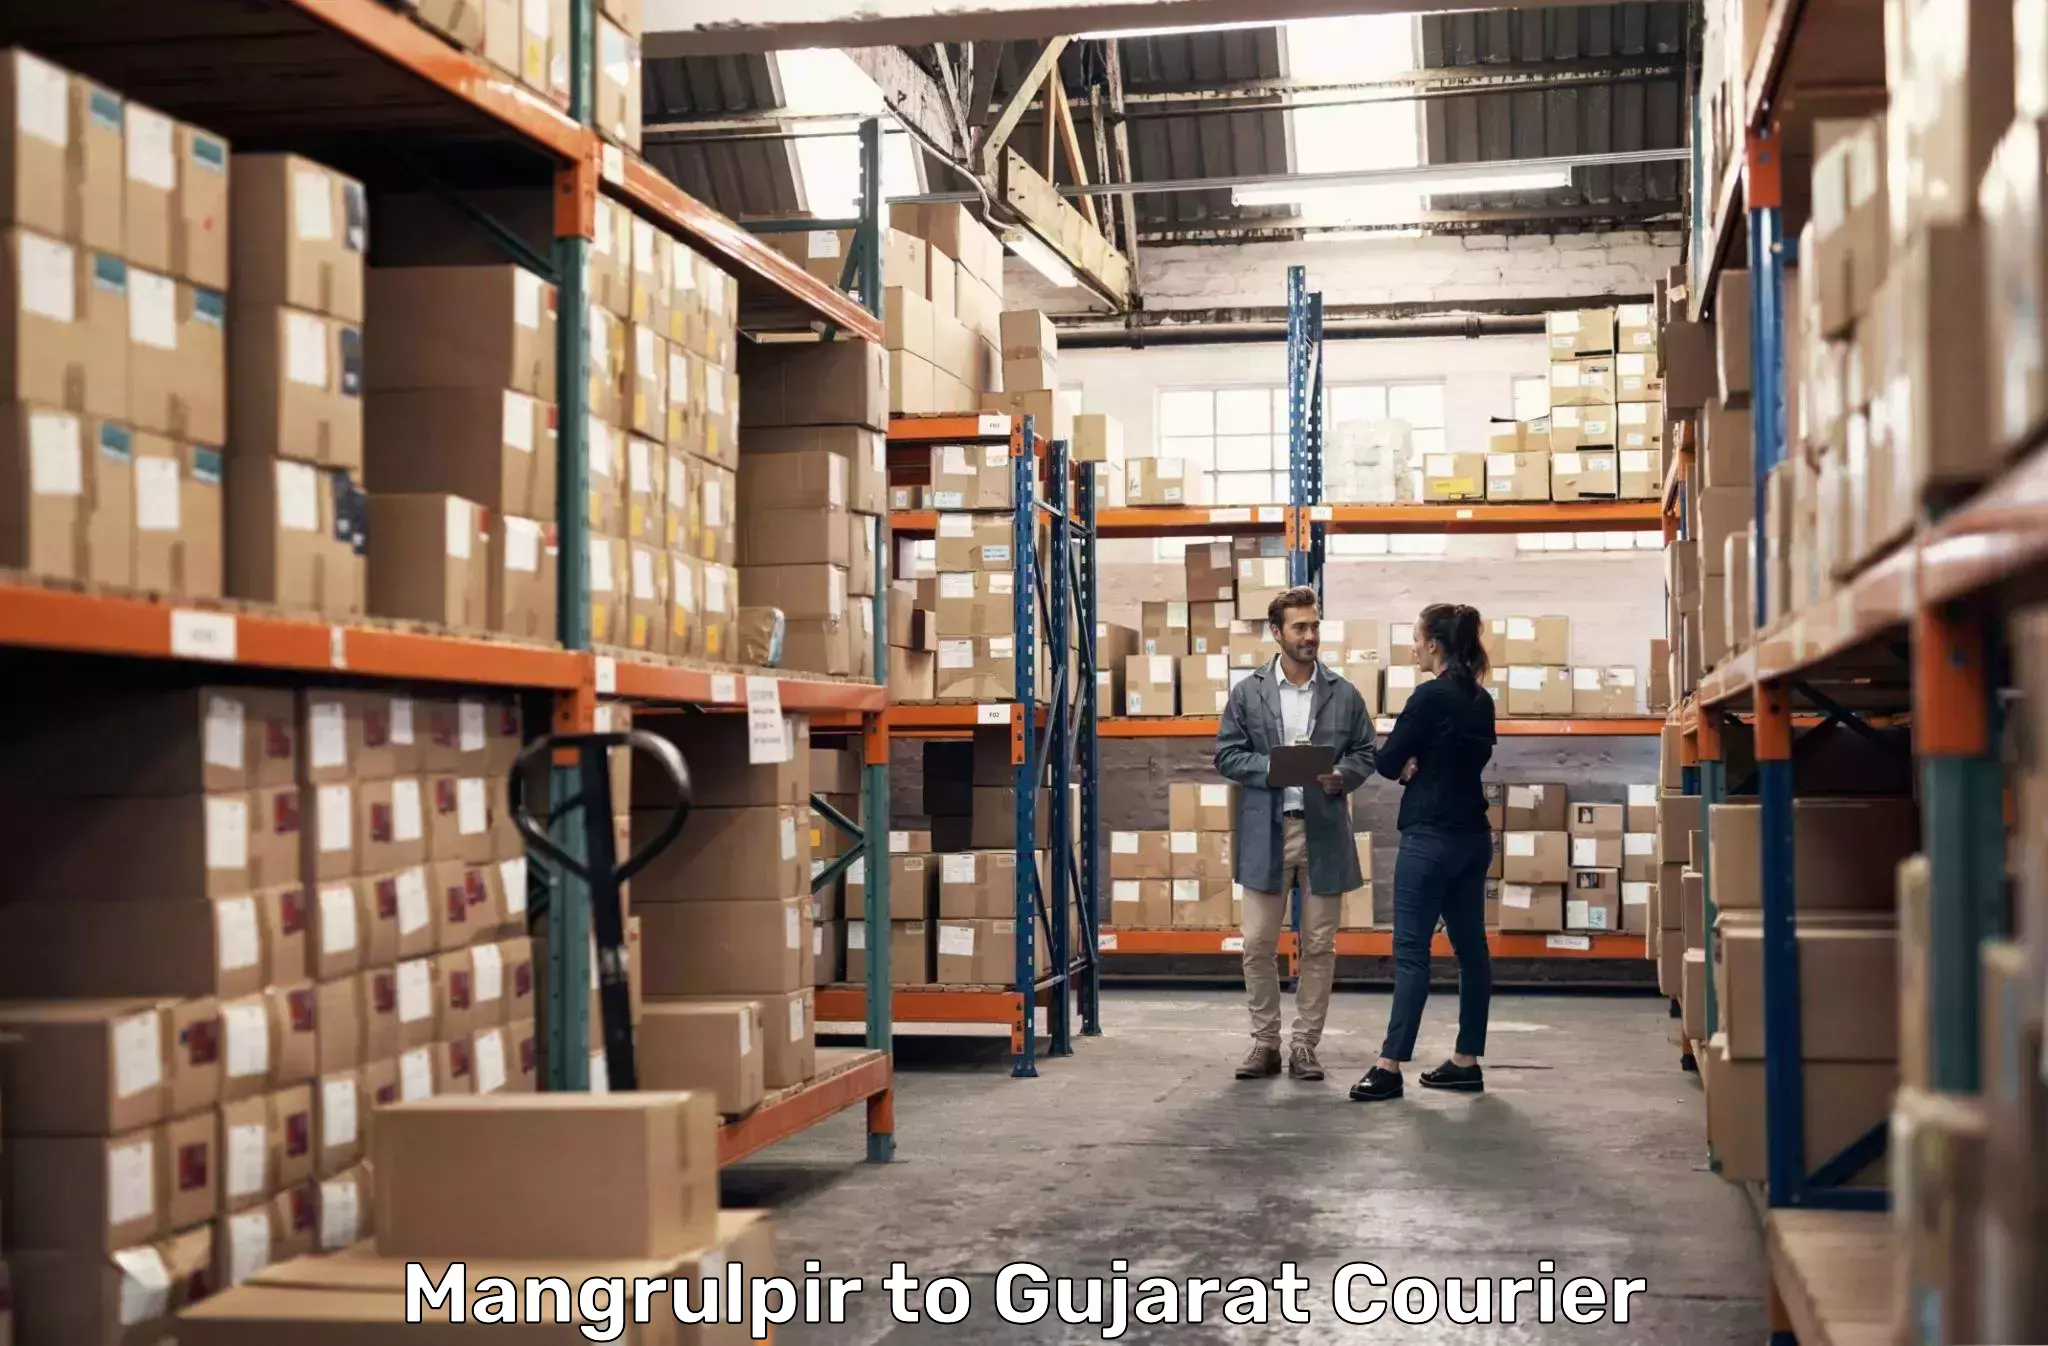 End-to-end delivery Mangrulpir to Ahmedabad